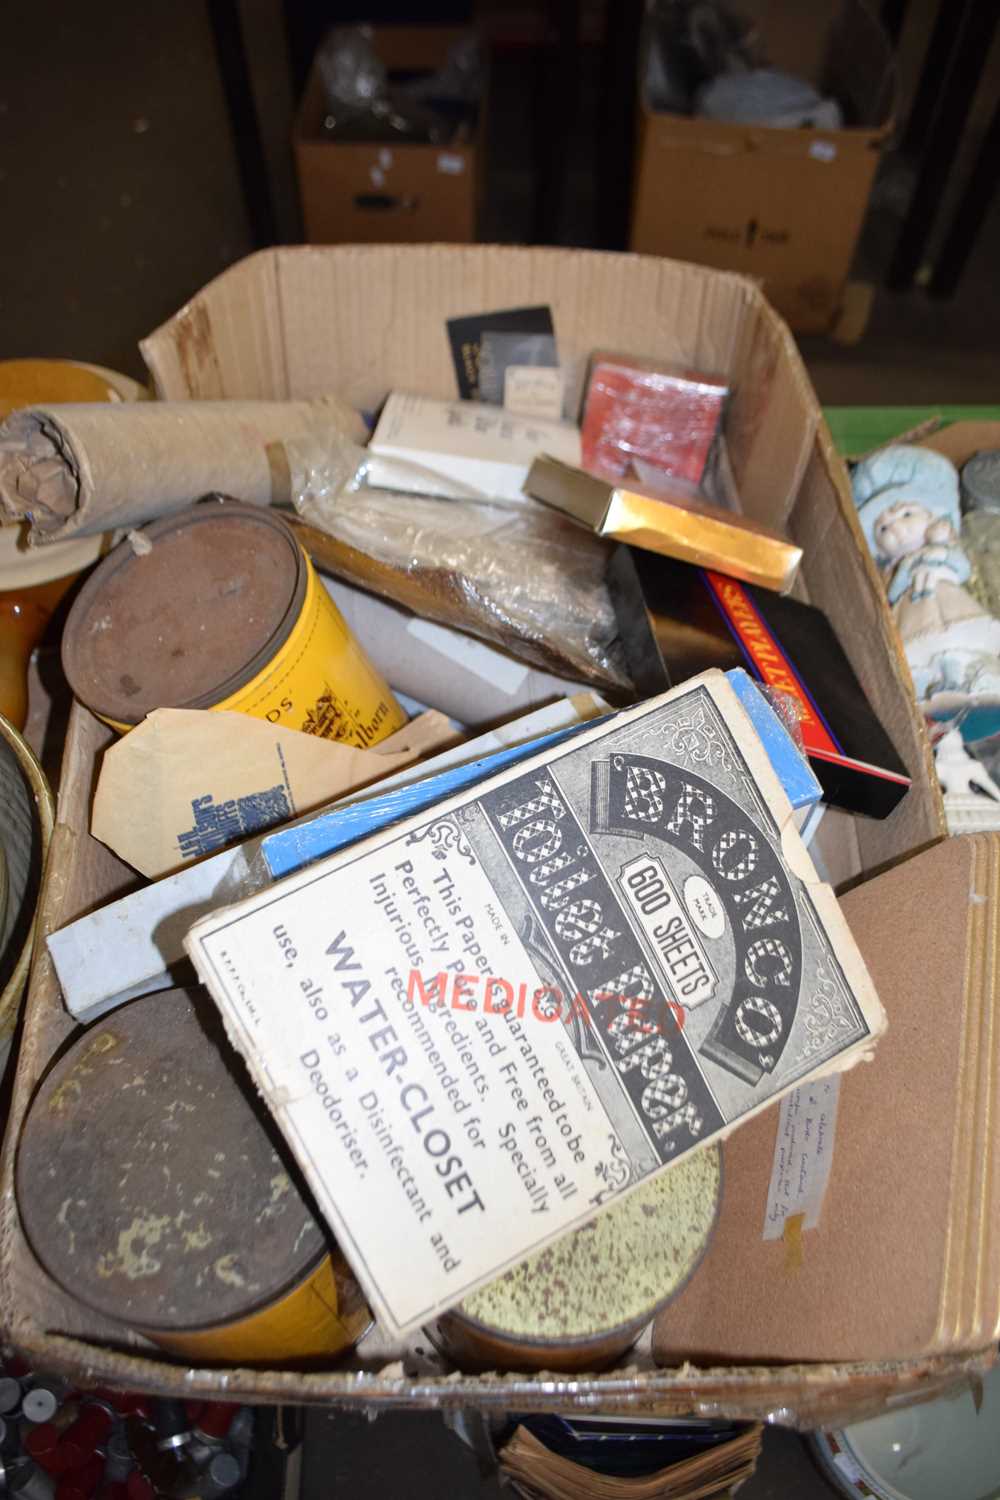 Box of various mixed items to include packets of vintage cigarettes, vintage tobacco tins and